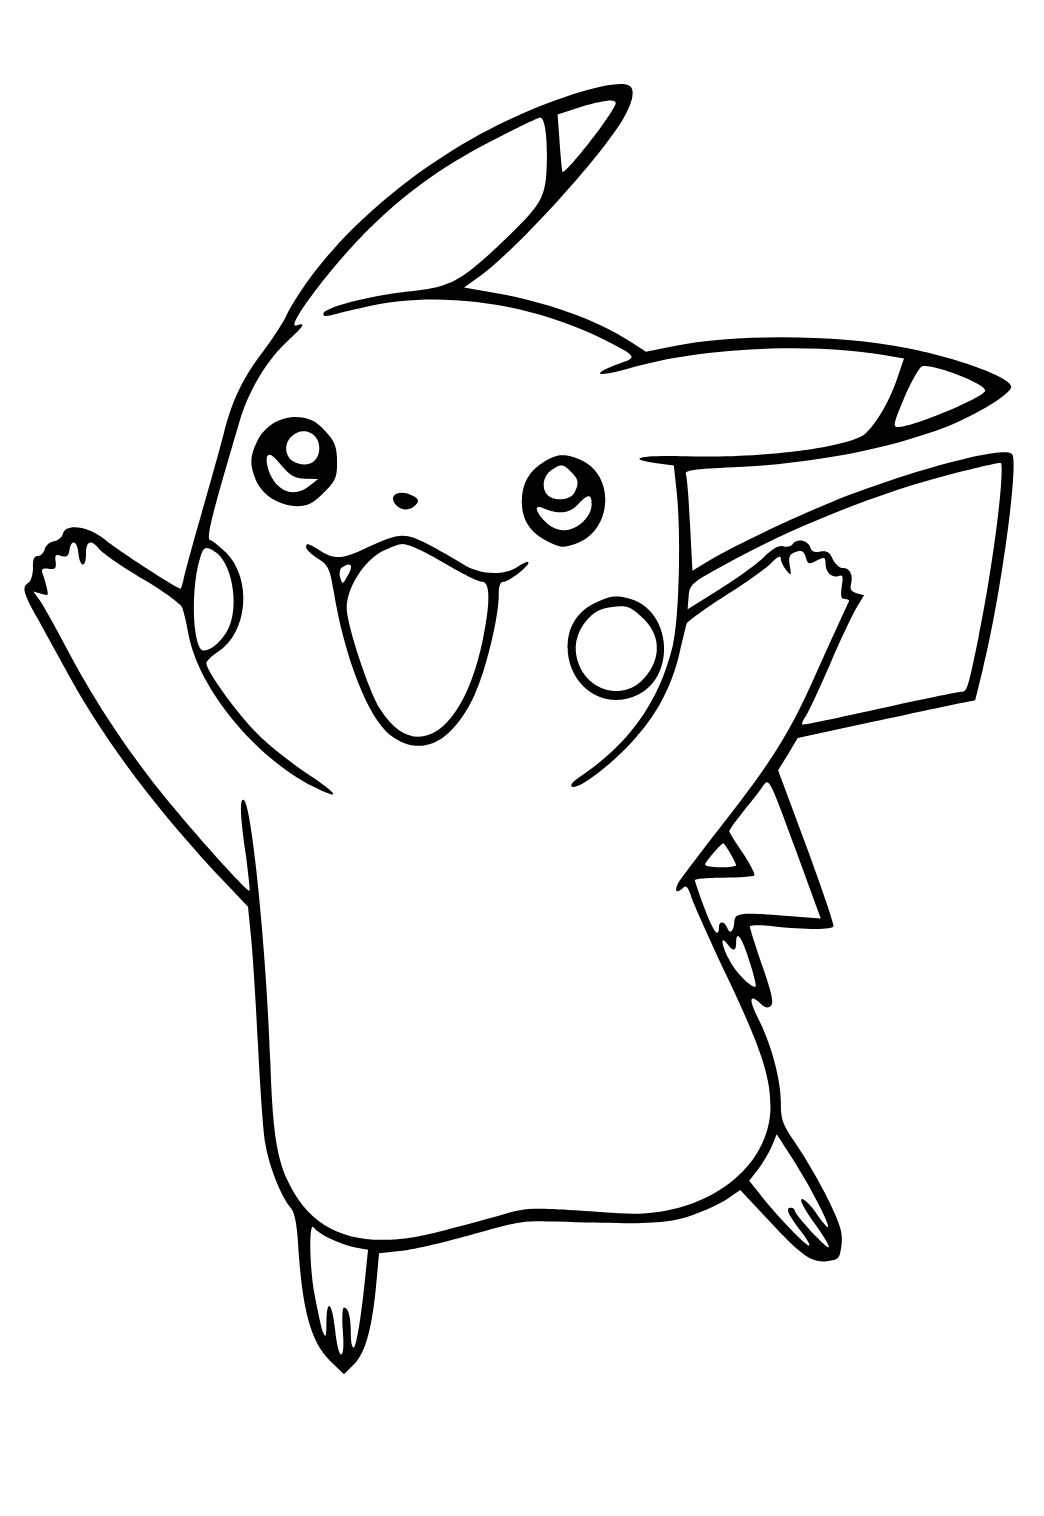 Free printable pikachu jump coloring page sheet and picture for adults and kids girls and boys